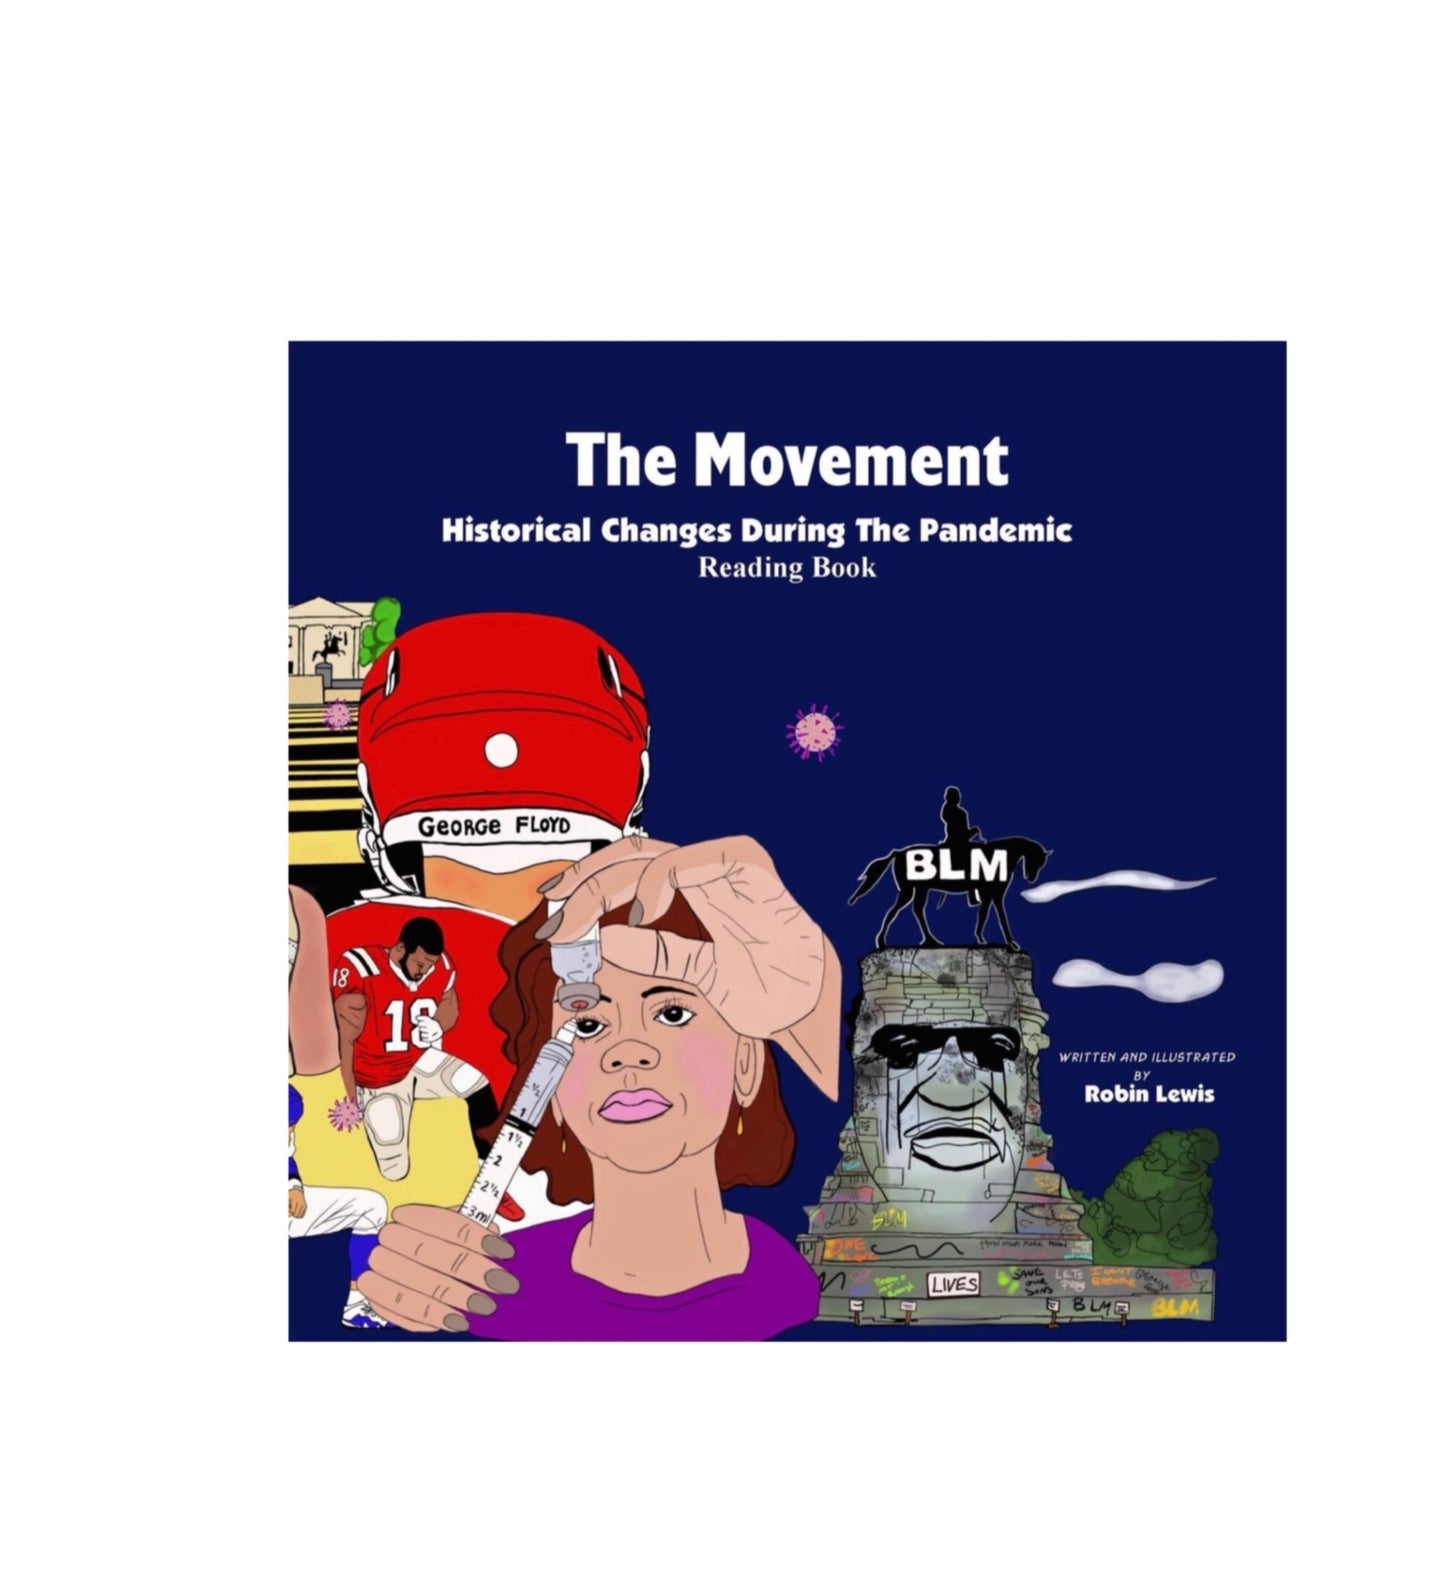 The Movement Historical Changes During the Pandemic Reading Book